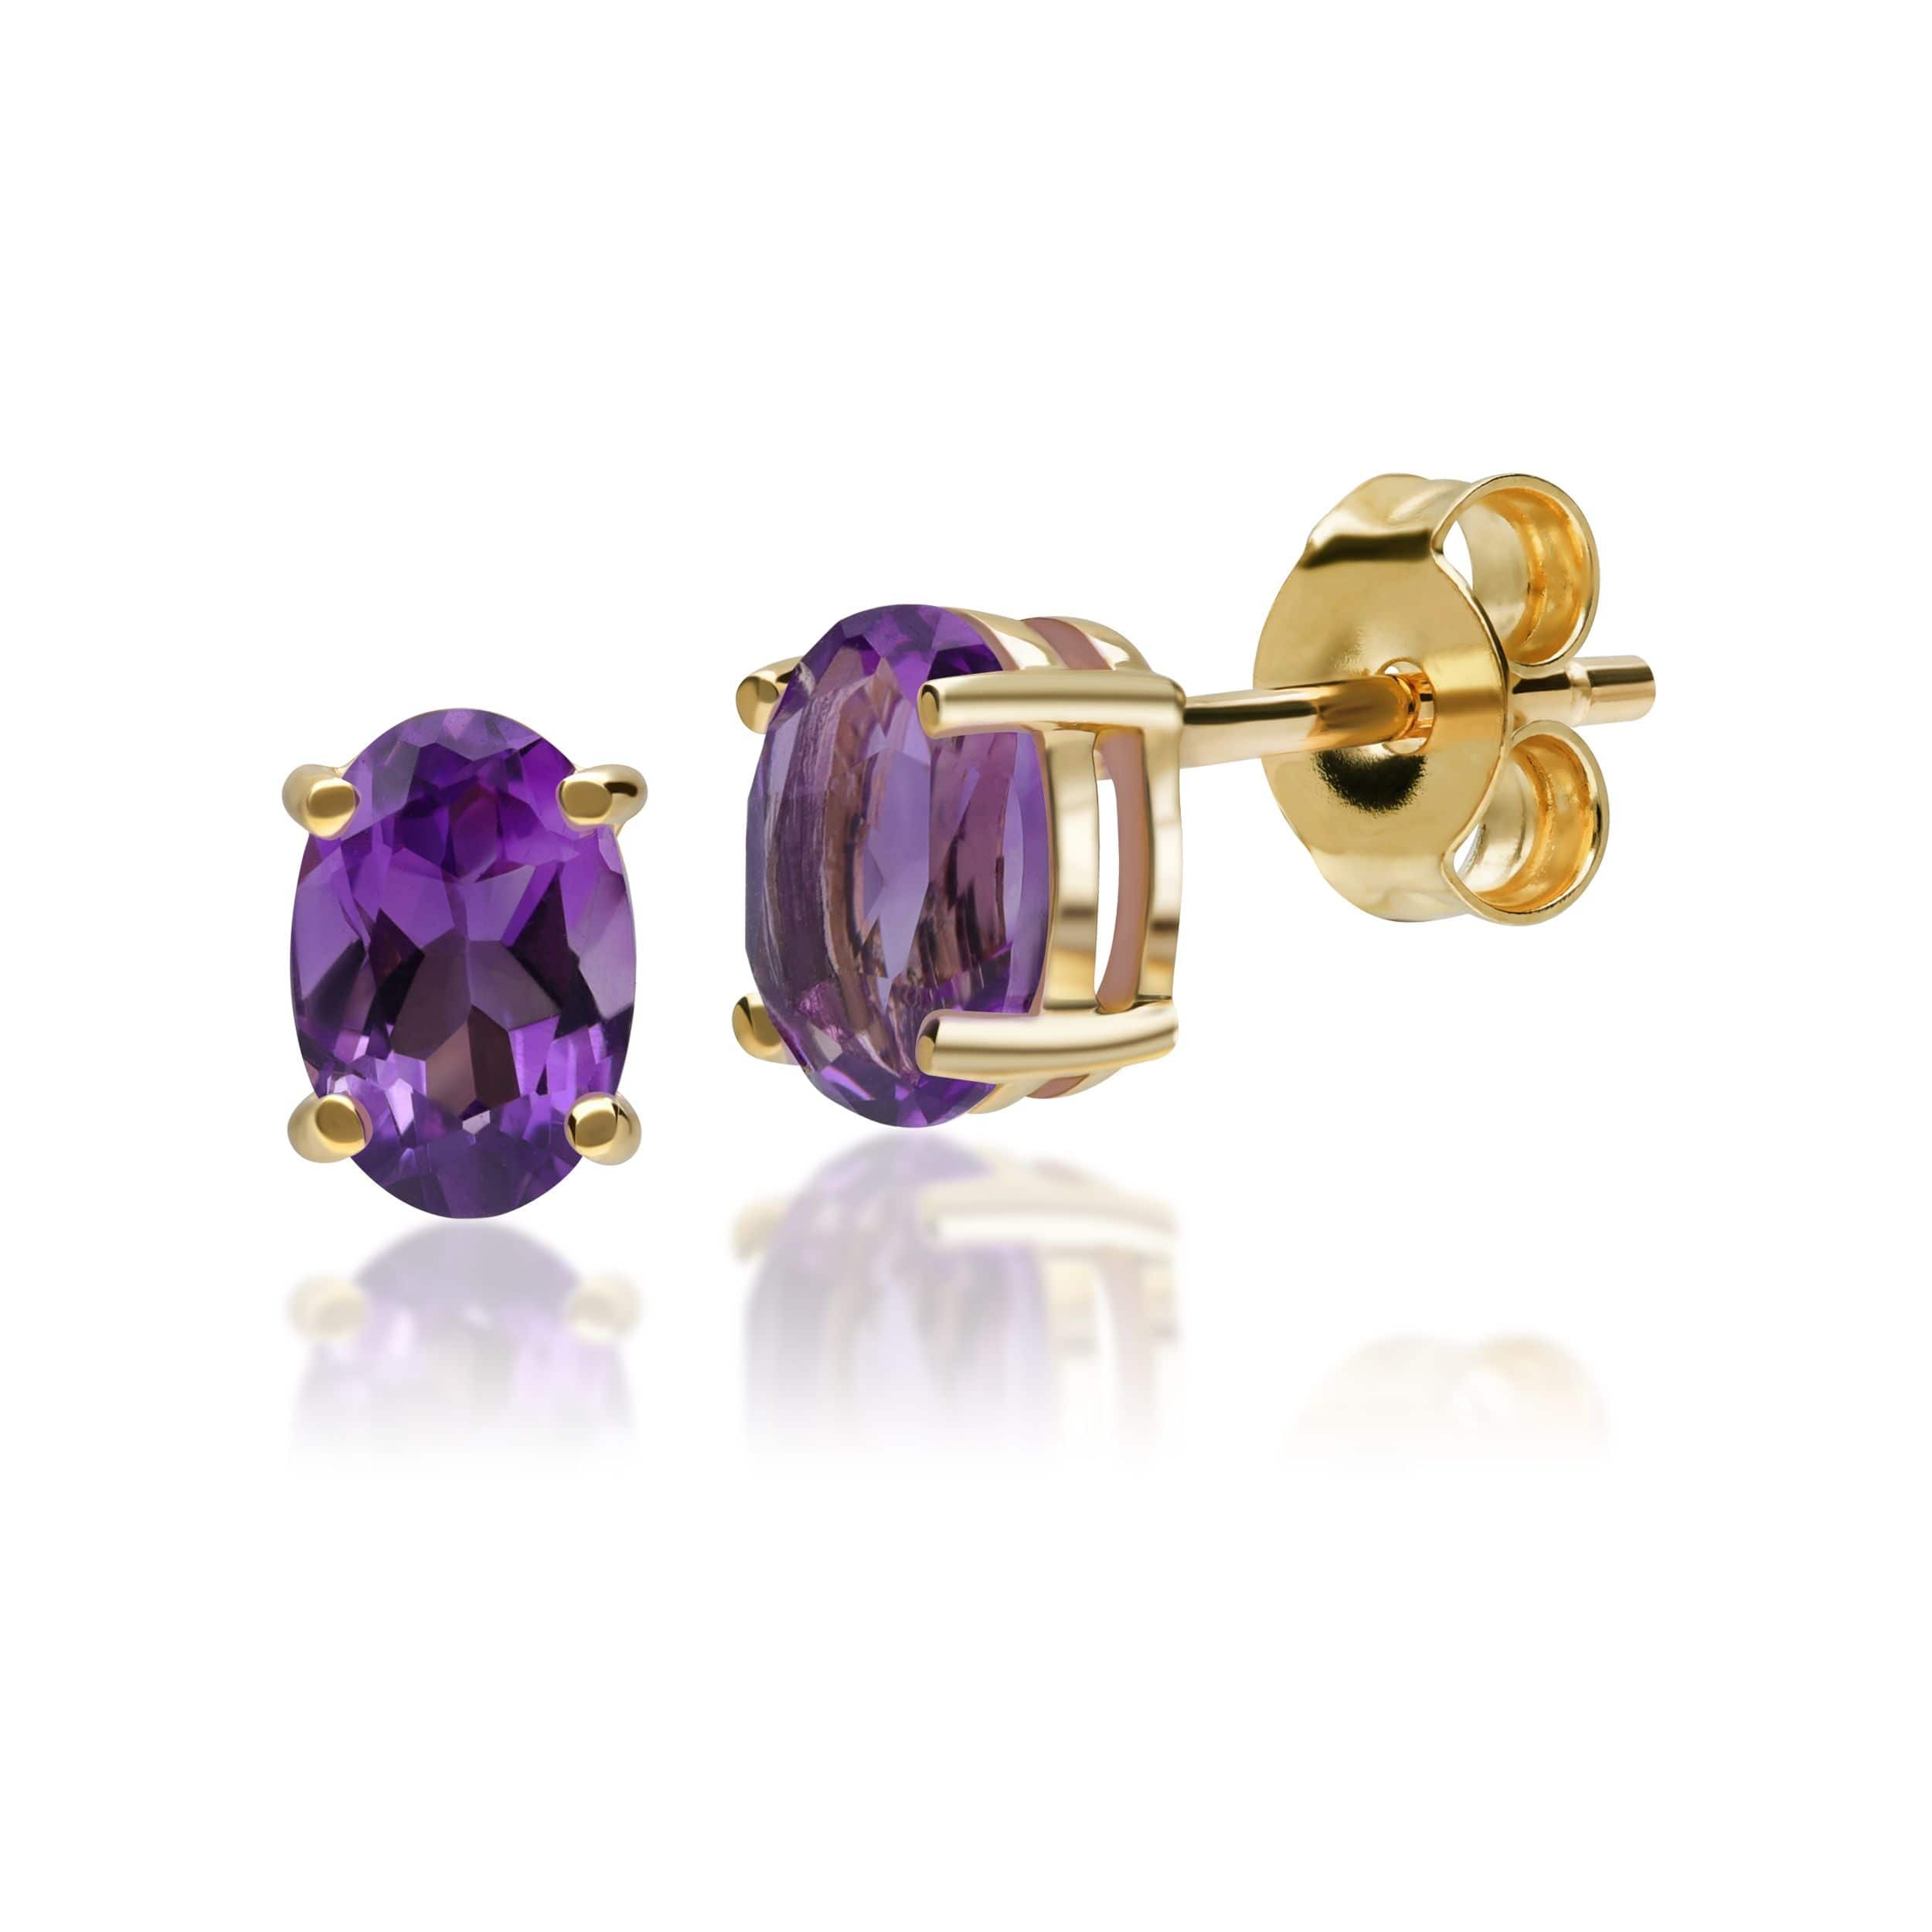 10243 Classic Oval Amethyst Stud Earrings in 9ct Yellow Gold 1